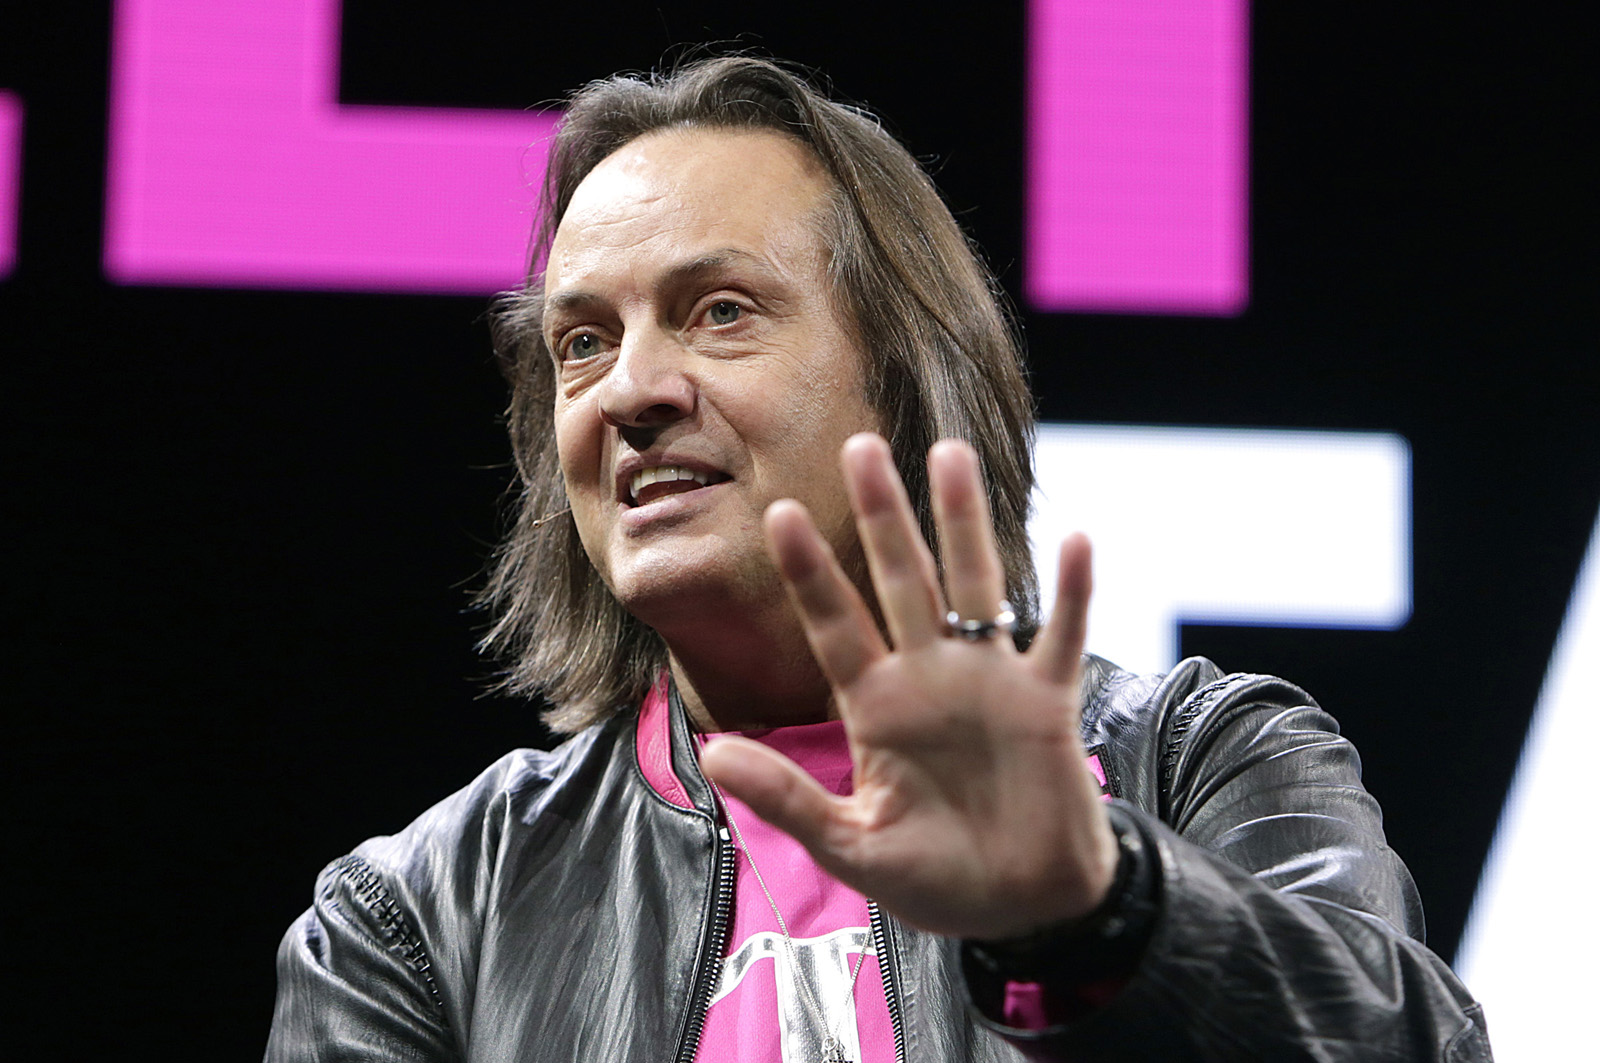 T-Mobile to Begin Testing LTE Home Internet Service Before 5G Service Launch